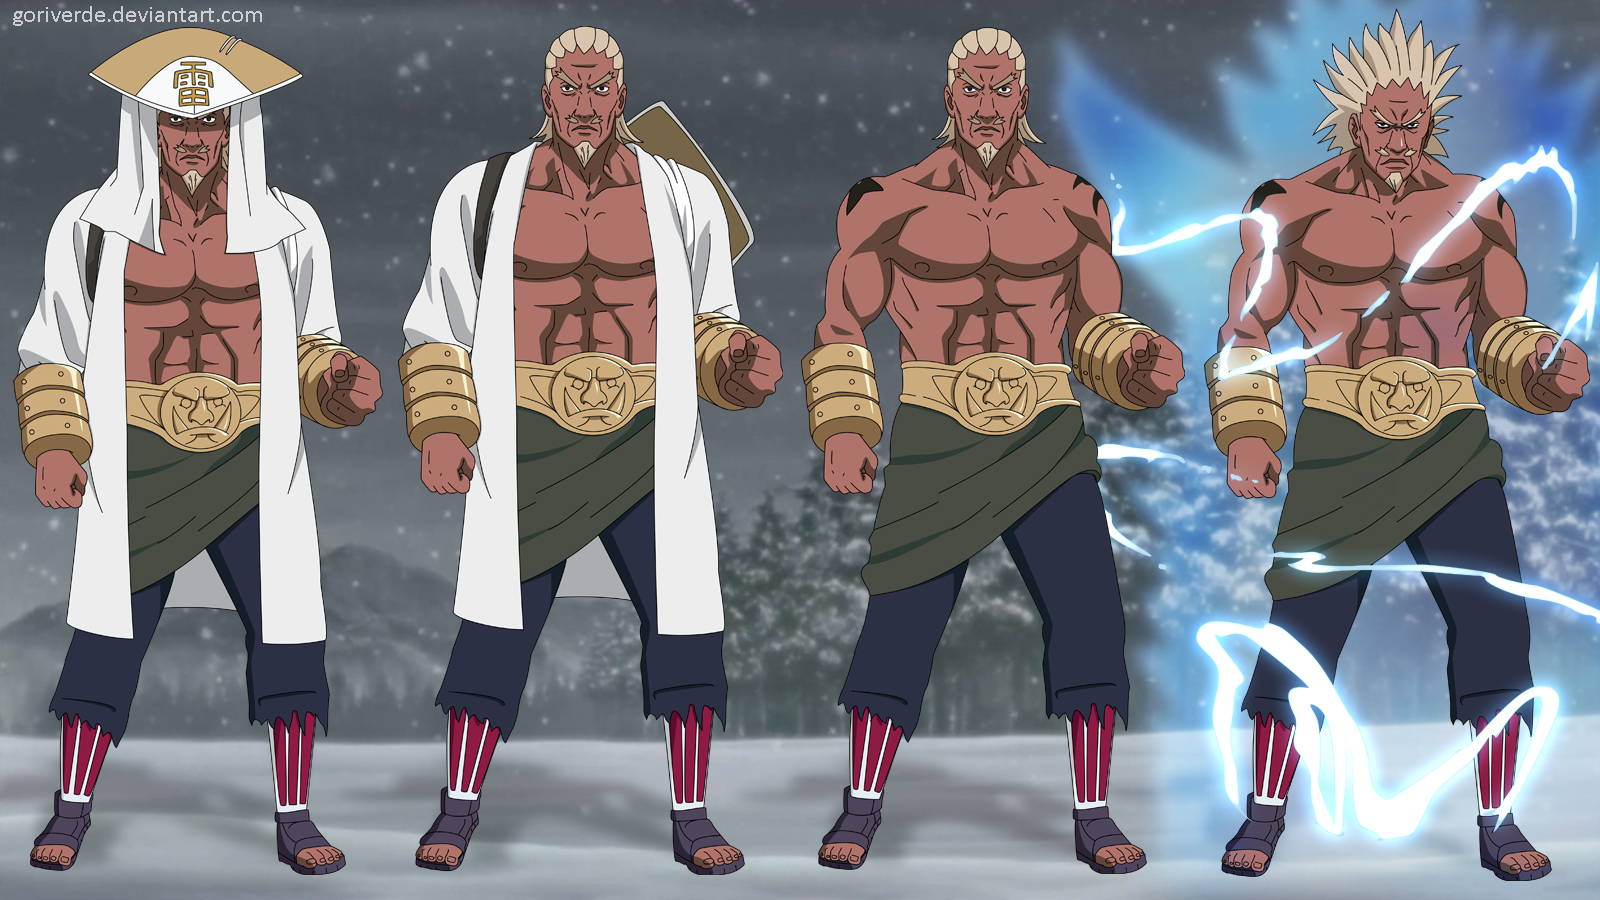 The 4 KAge by  on @DeviantArt